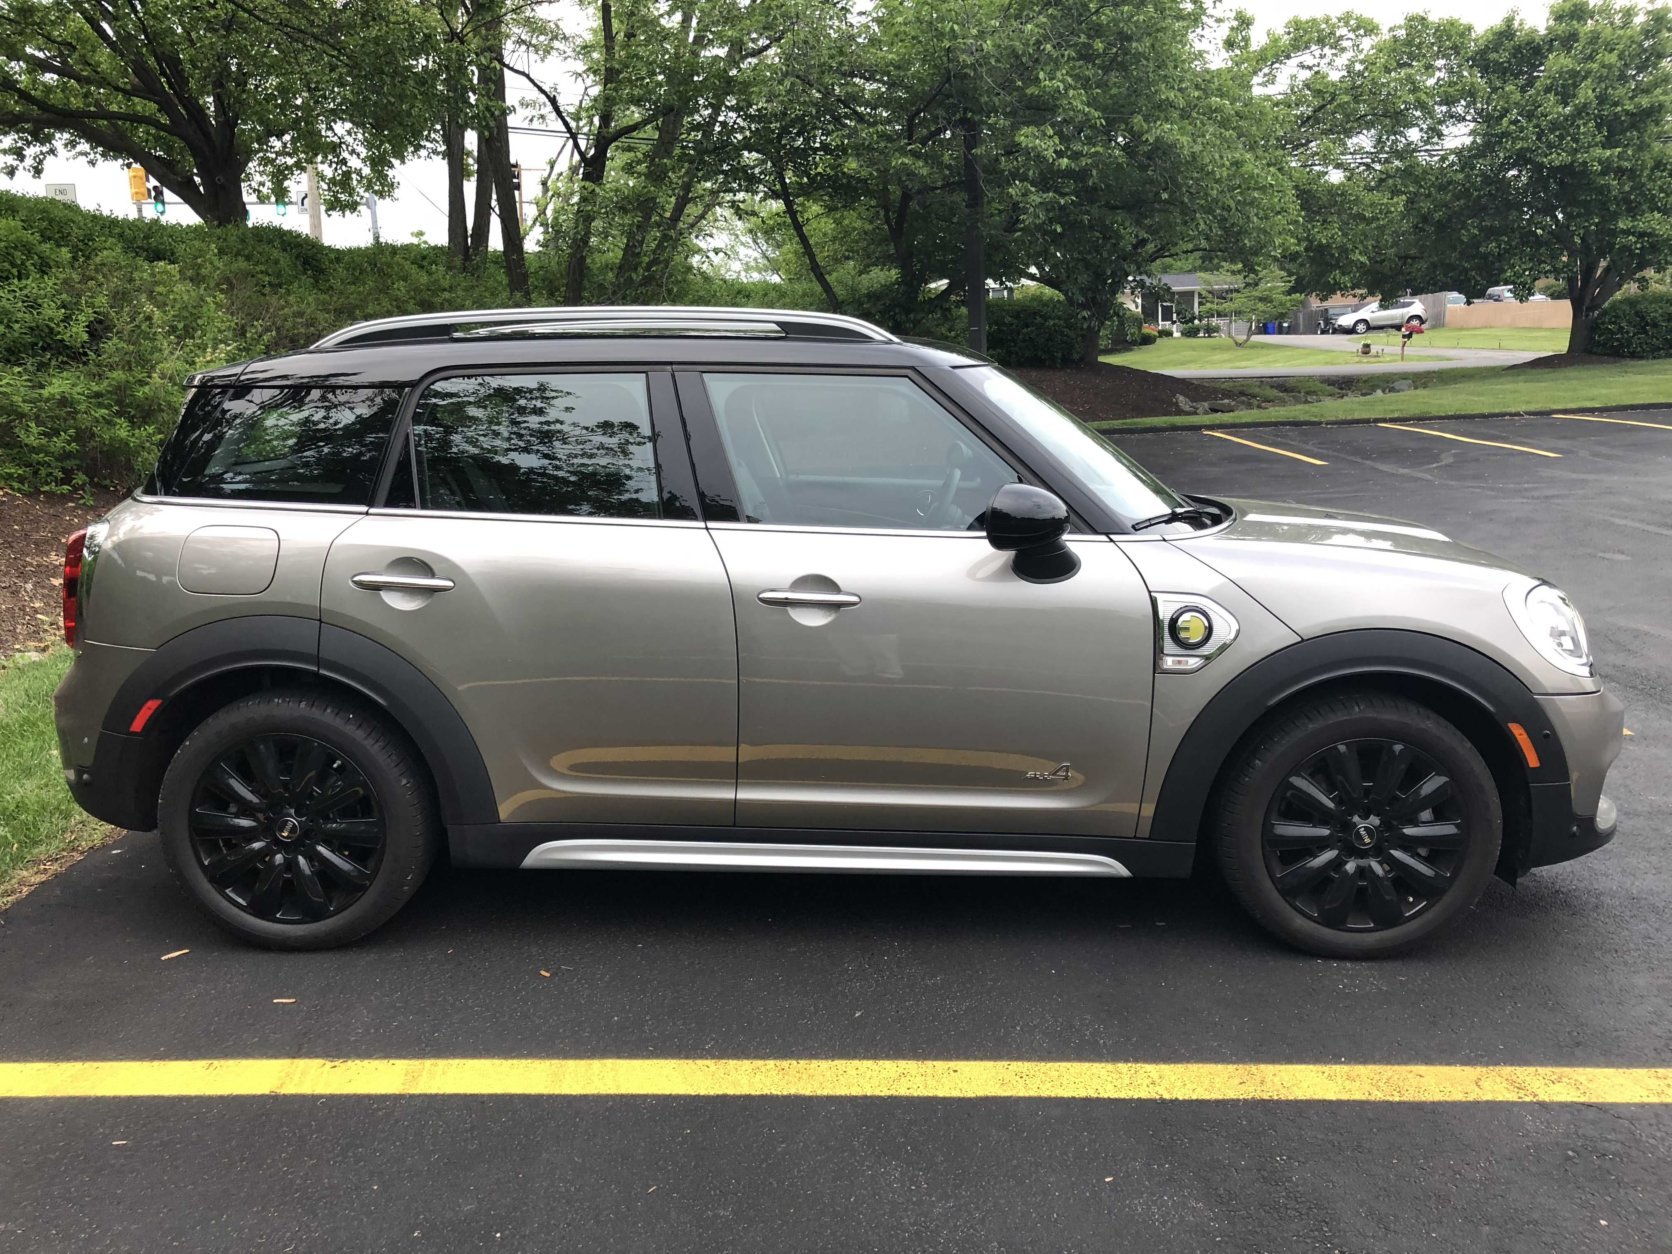 Car Review: MINI’s biggest vehicle the Countryman gets all charged up ...